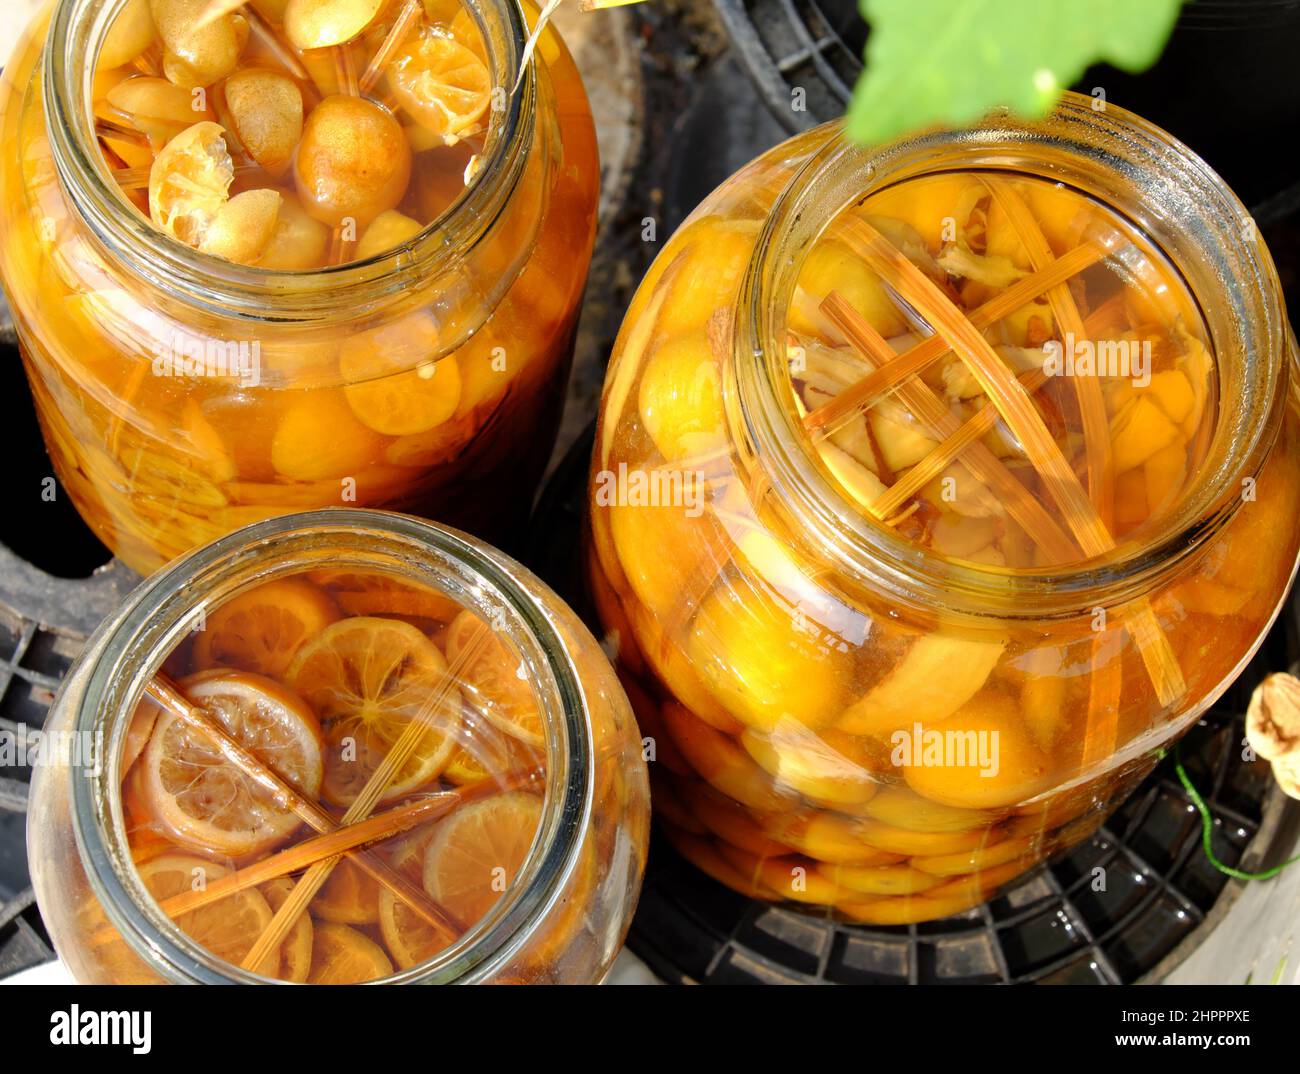 Big jar yellow salted kumquat and bask outdoor to make delicious beverage for hot summer day Stock Photo